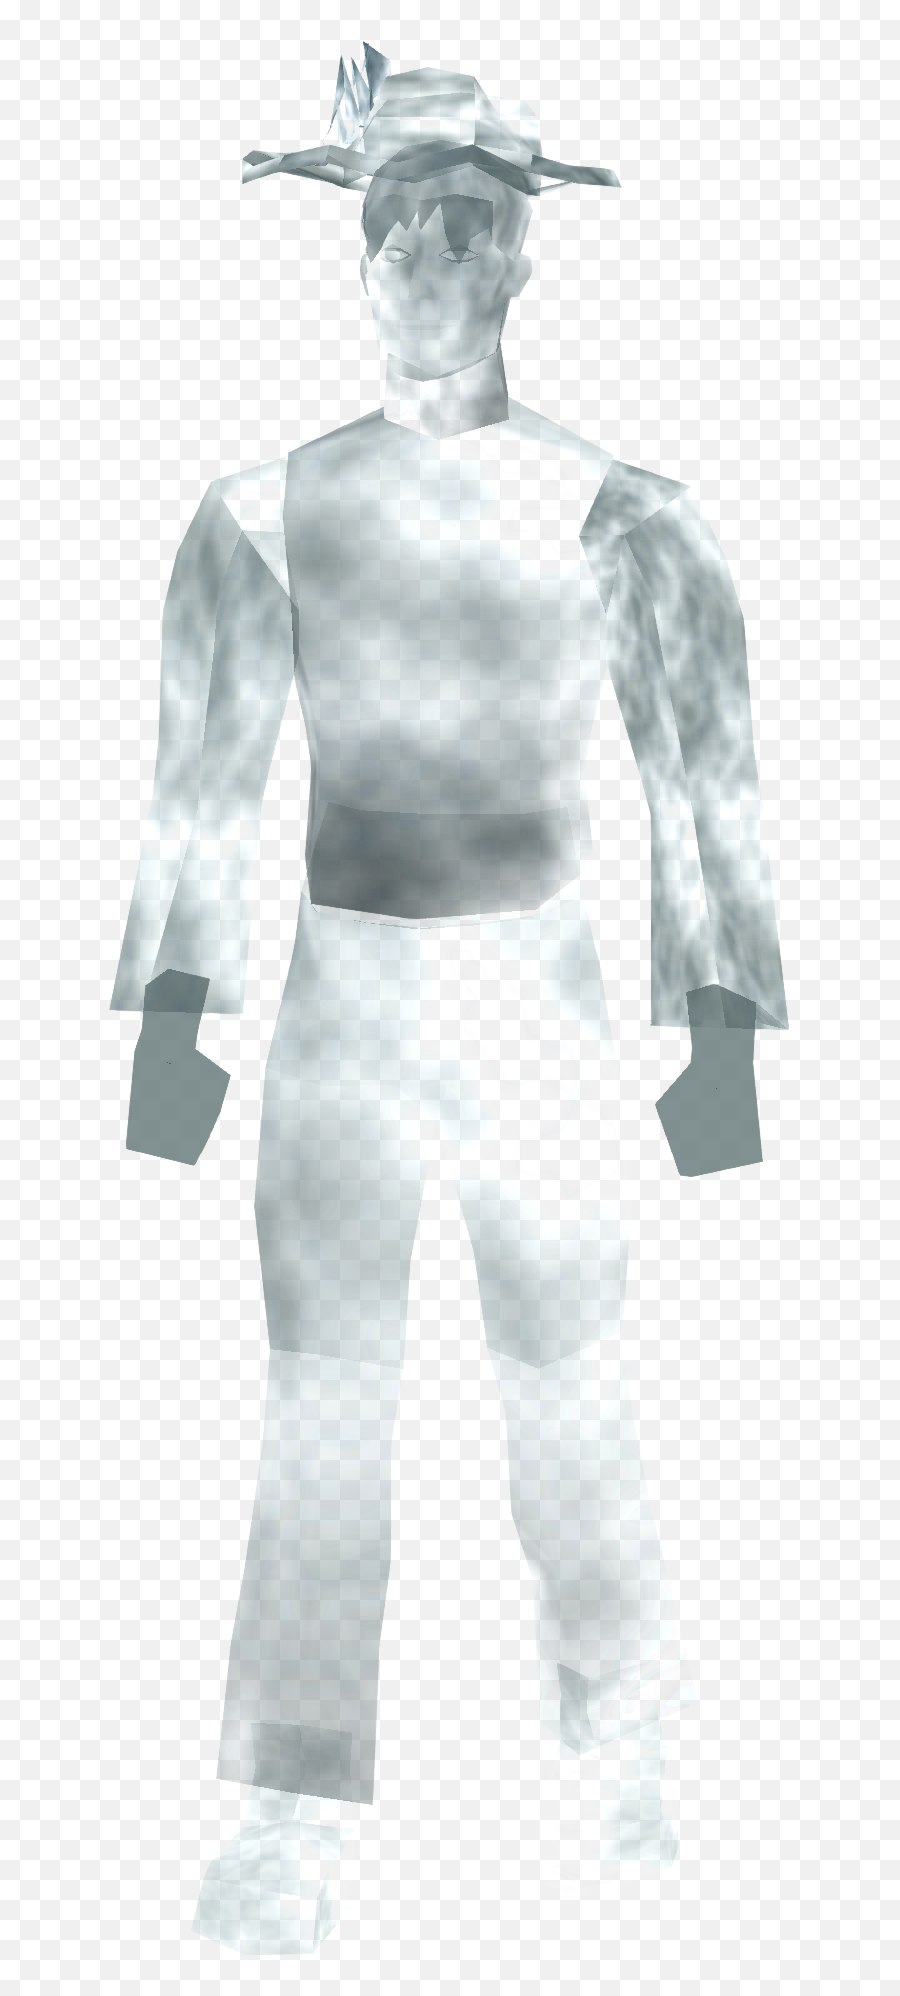 Download Free Png Ghost Transparent Image - Dlpngcom Ghost Sailor,Ghost Png Transparent